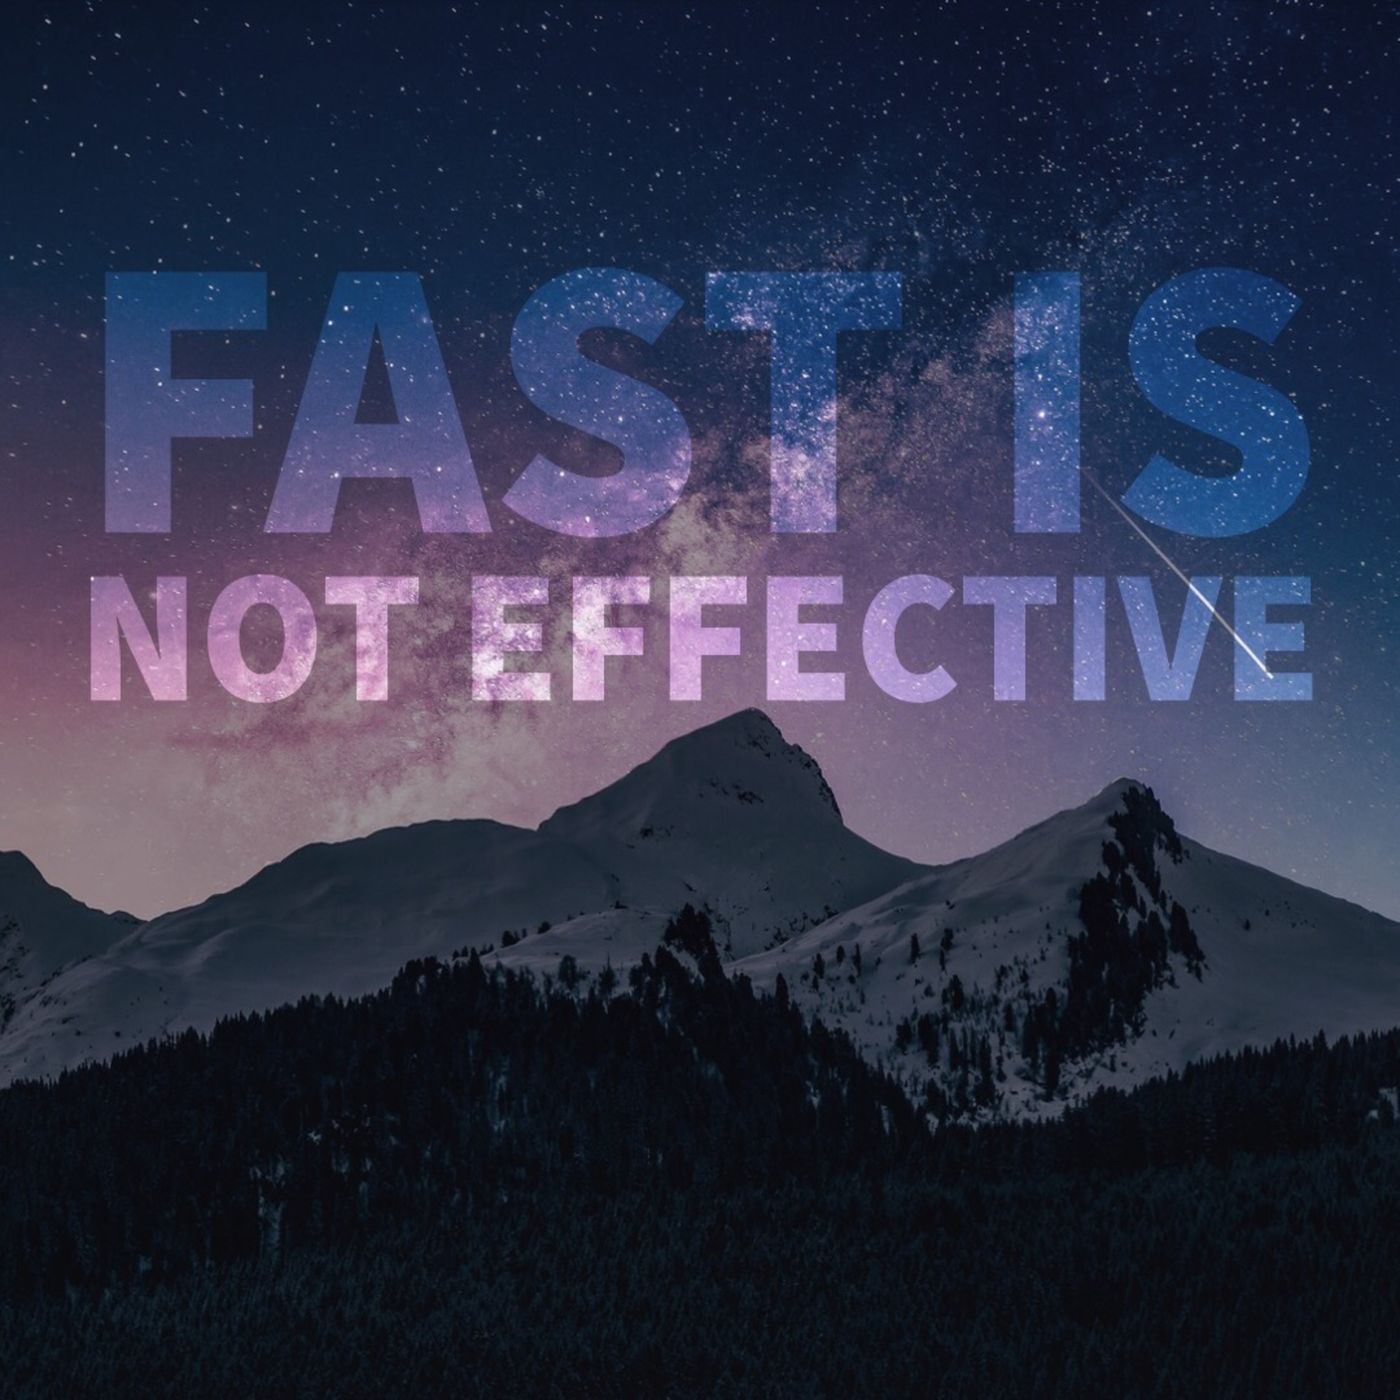 Fast is not Effective